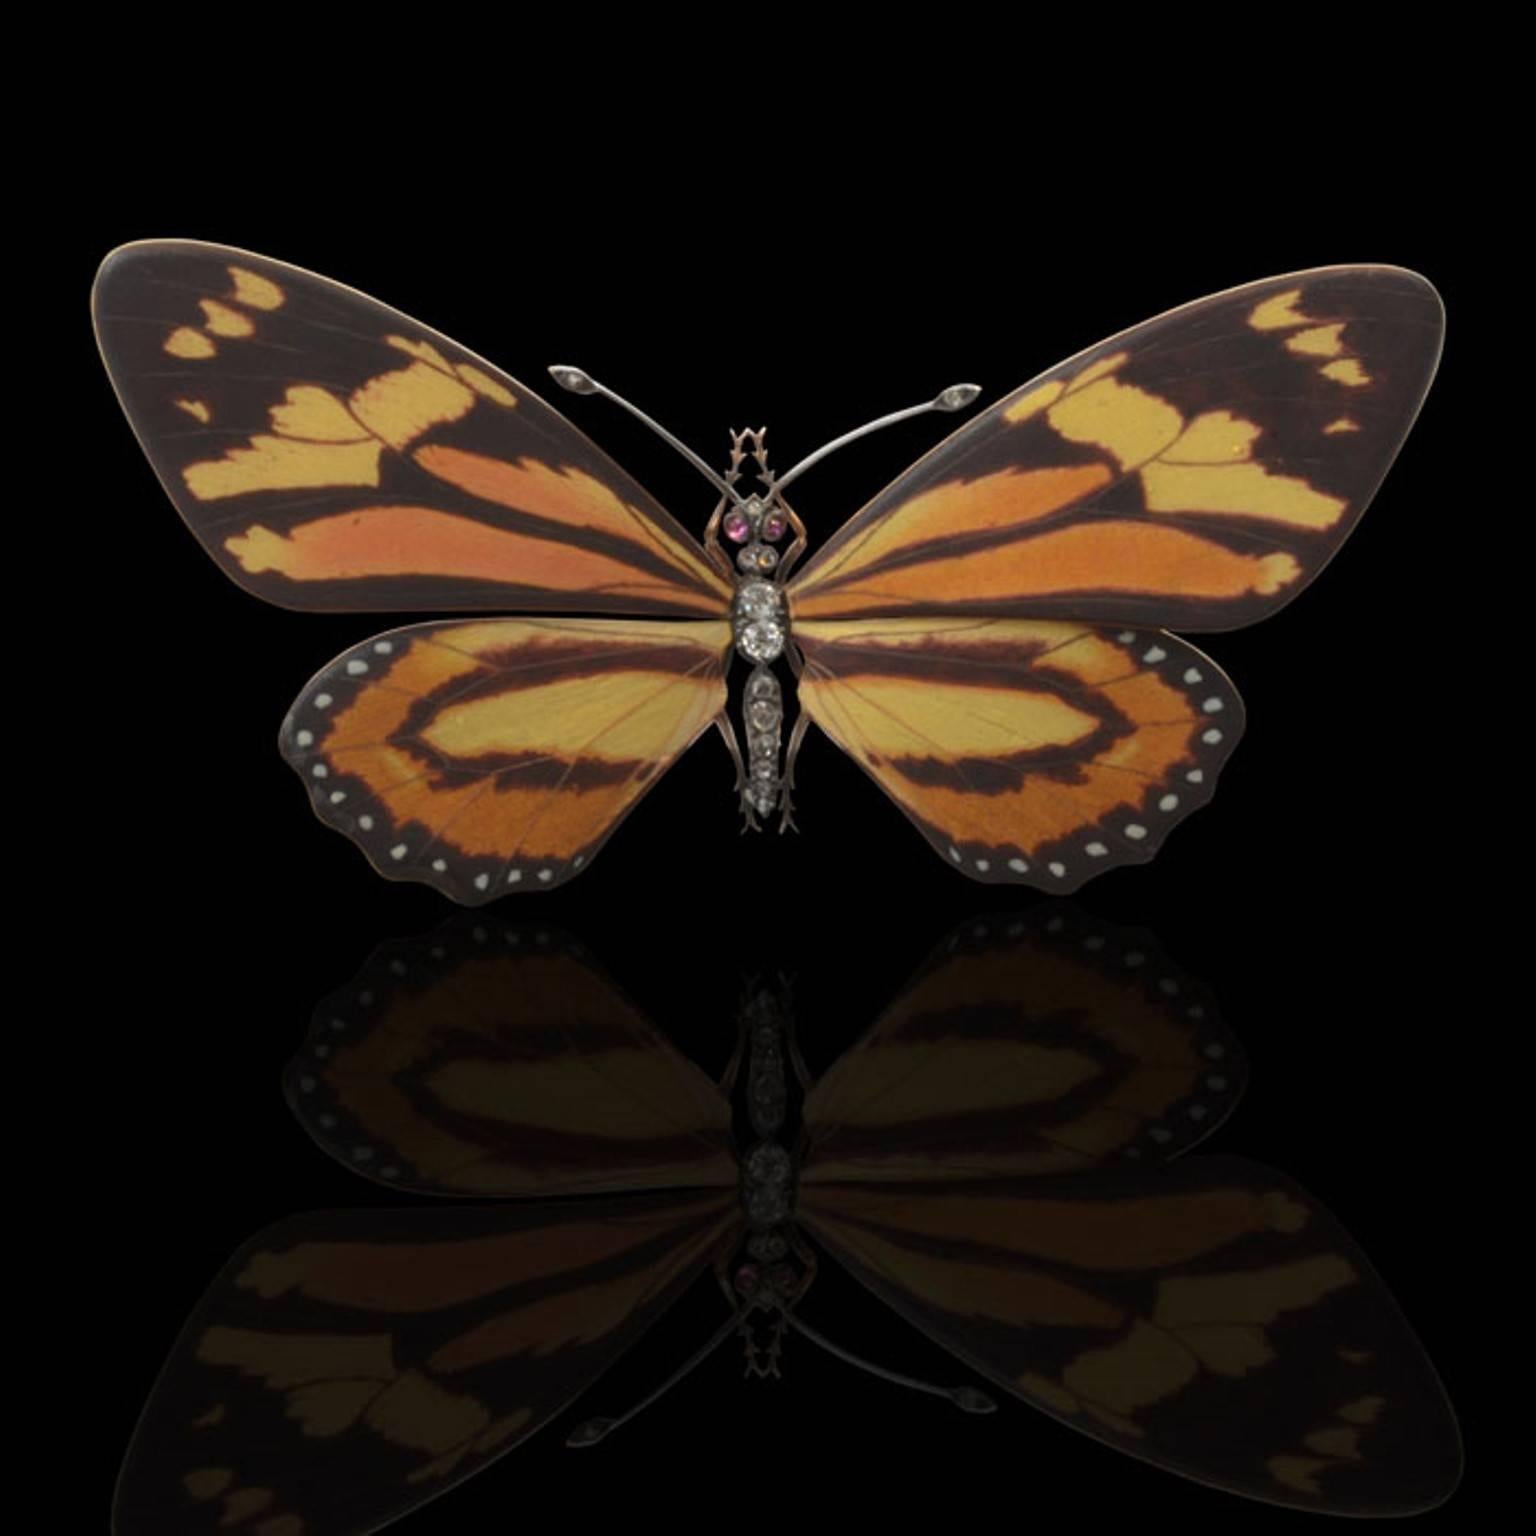 A rare enamel brooch in the form of a butterfly in flight its wings in polychrome enamel with a satin finish, the thorax, abdomen and antennae set with European brilliants and rose-cut diamonds and the eyes with cabochon rubies mounted in silver and